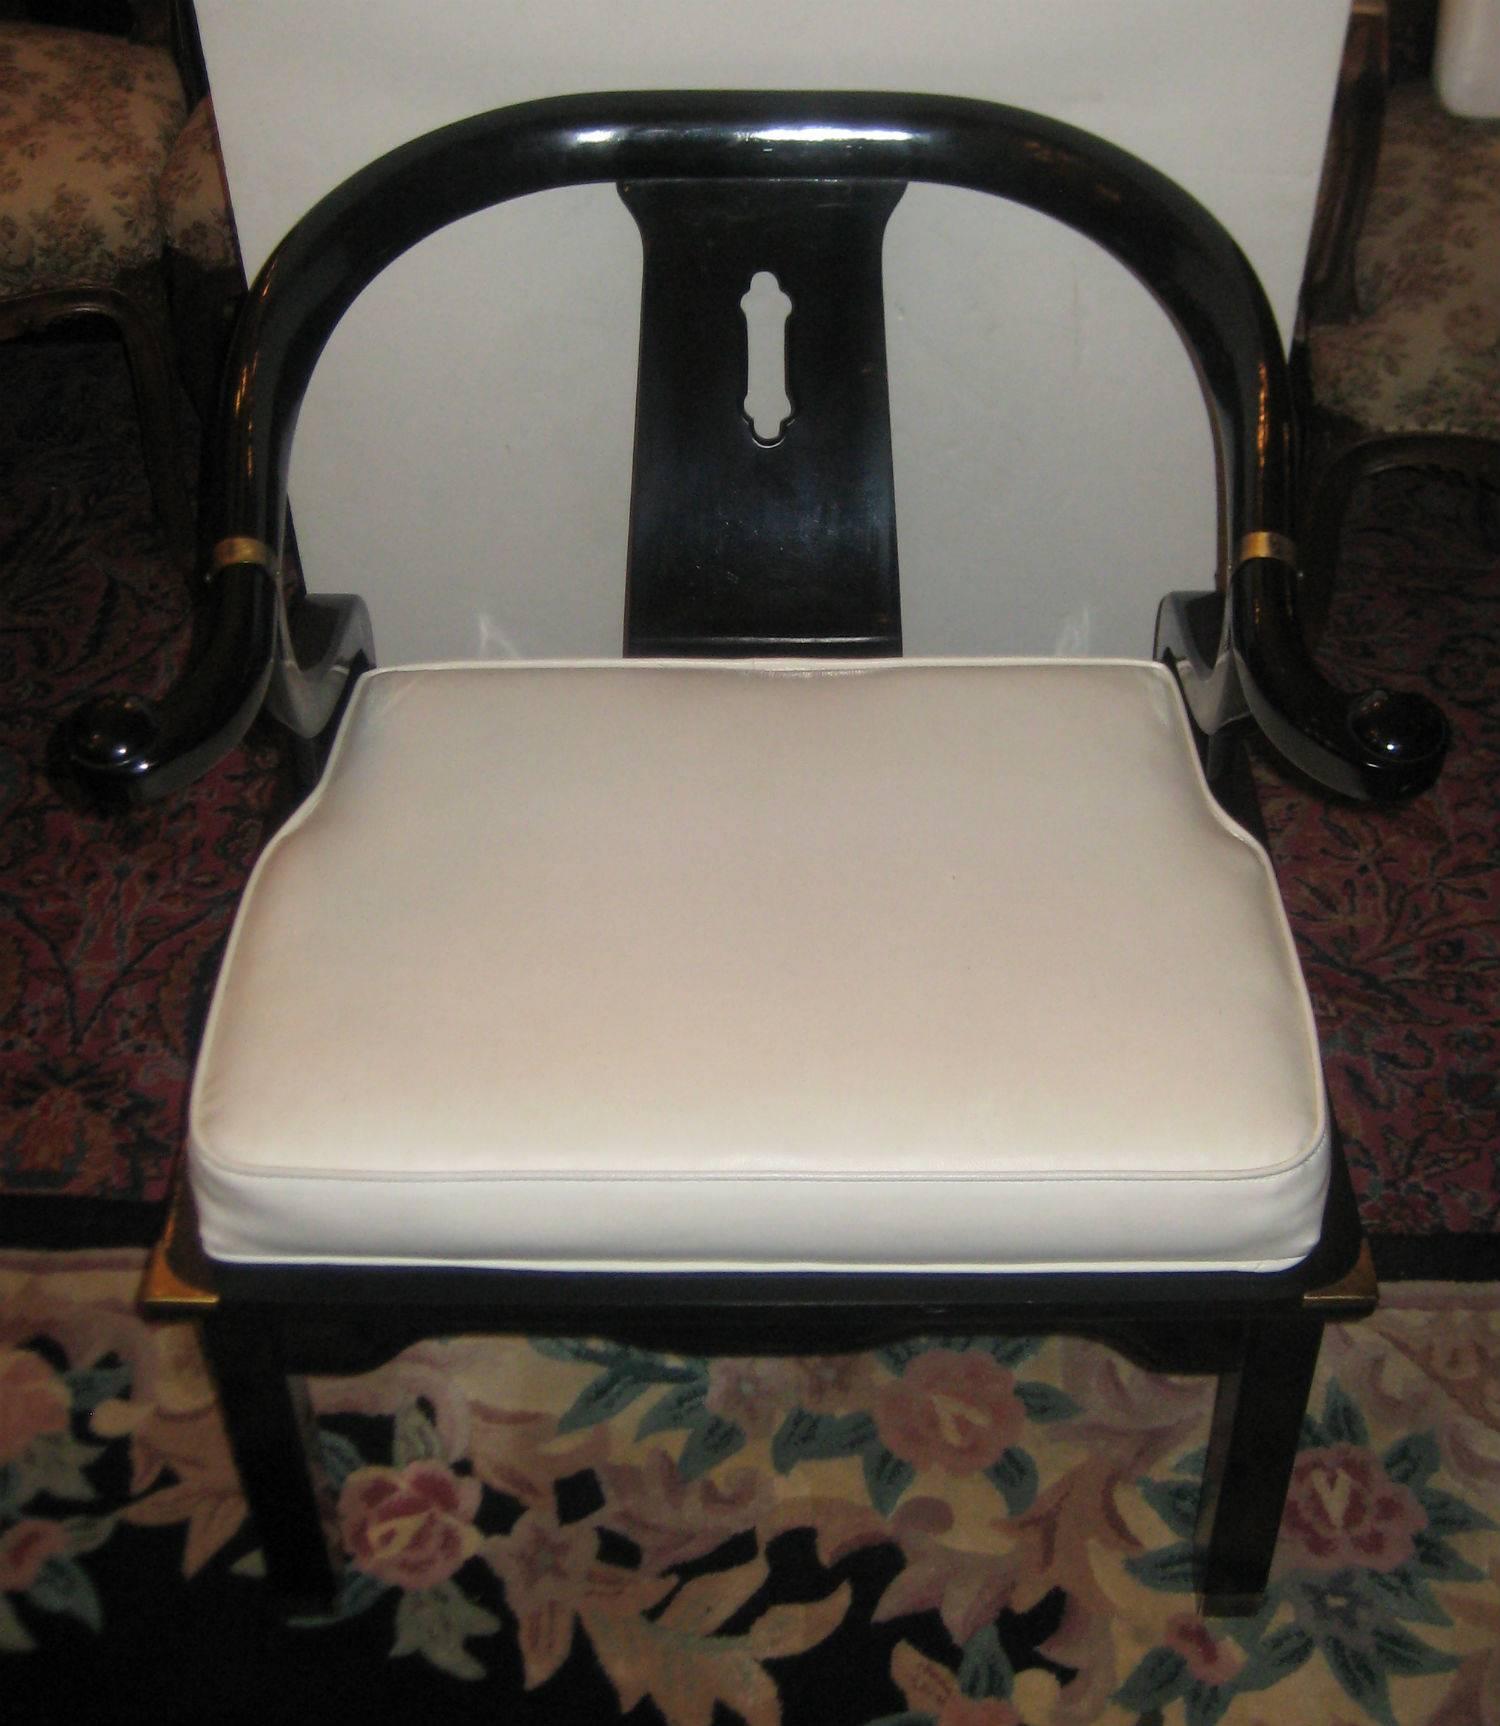 Pair of James Mont style black lacquer horseshoe back chairs and ottoman/table, upholstered in white vinyl; the chairs have a removable back cushion for added seating comfort. Chairs measures: H 29.5